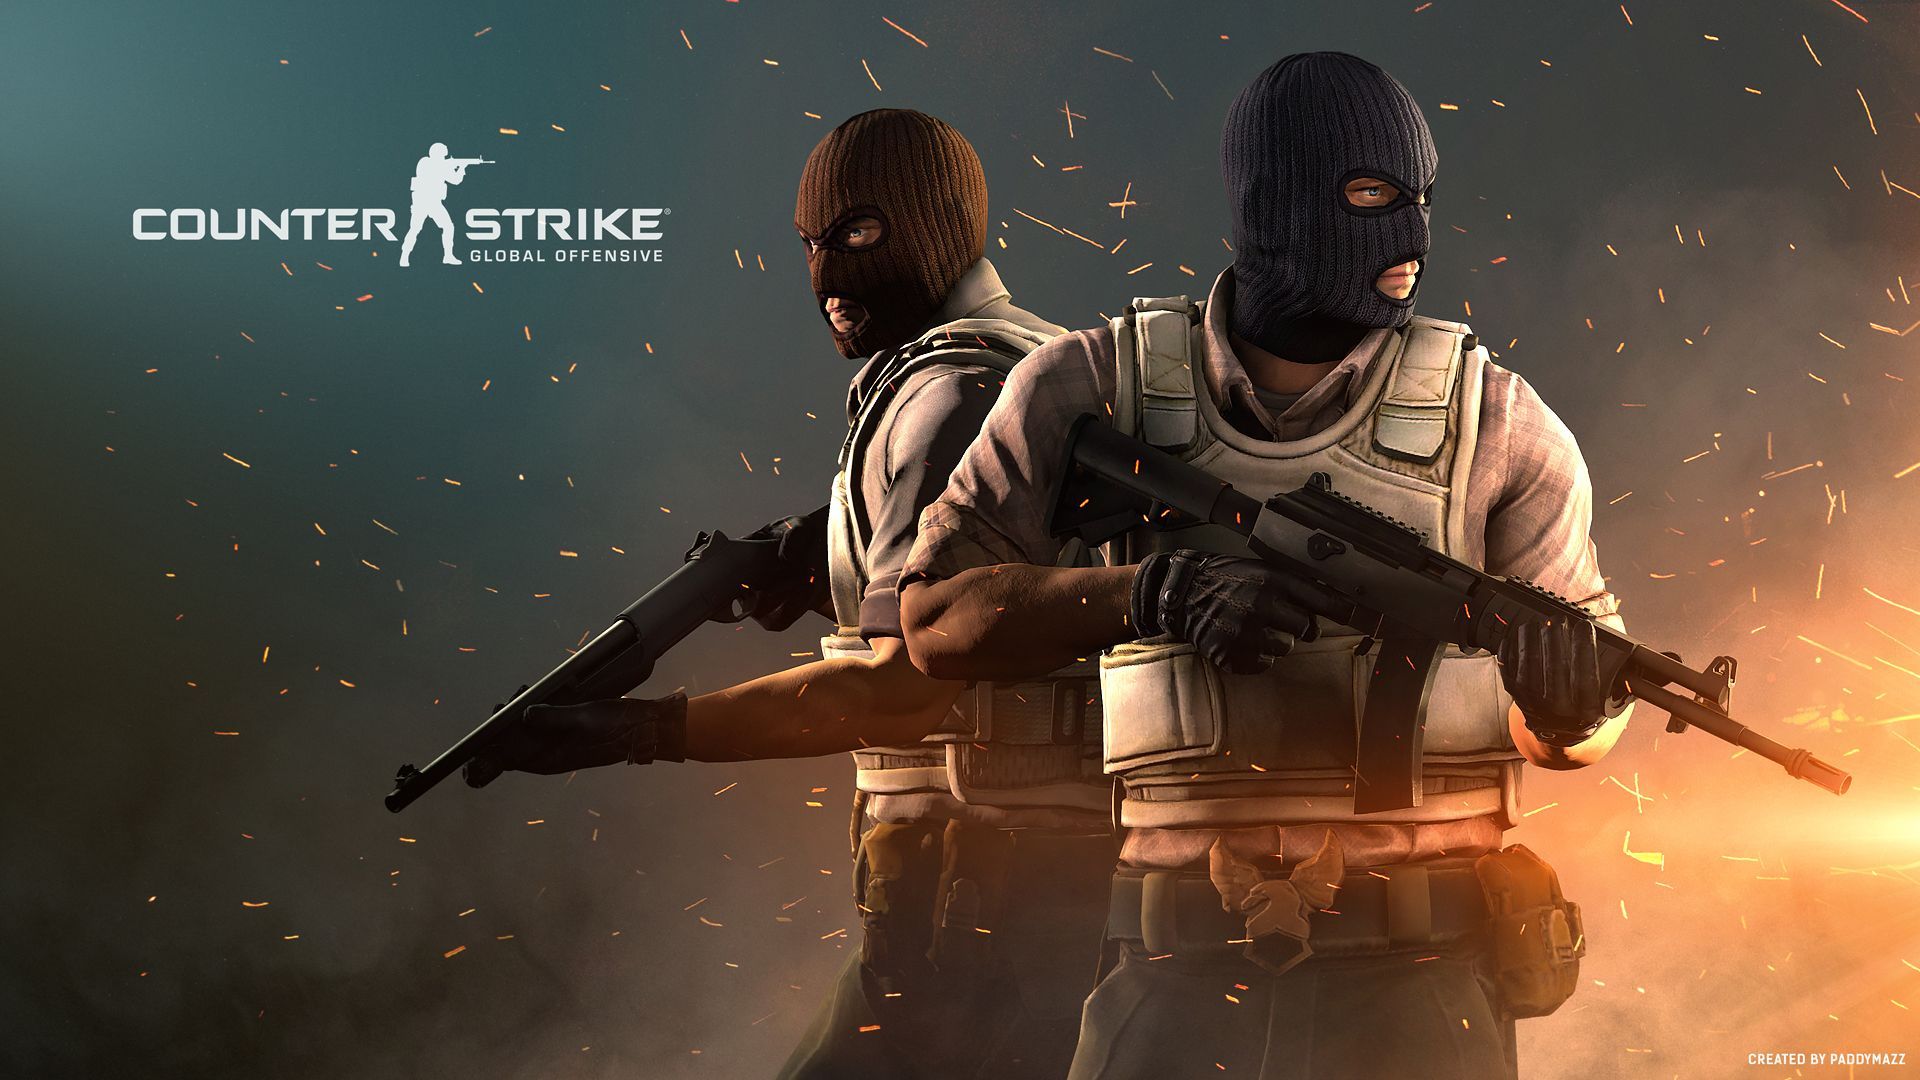 What we know about Counter-Strike 2: release date, beta test date